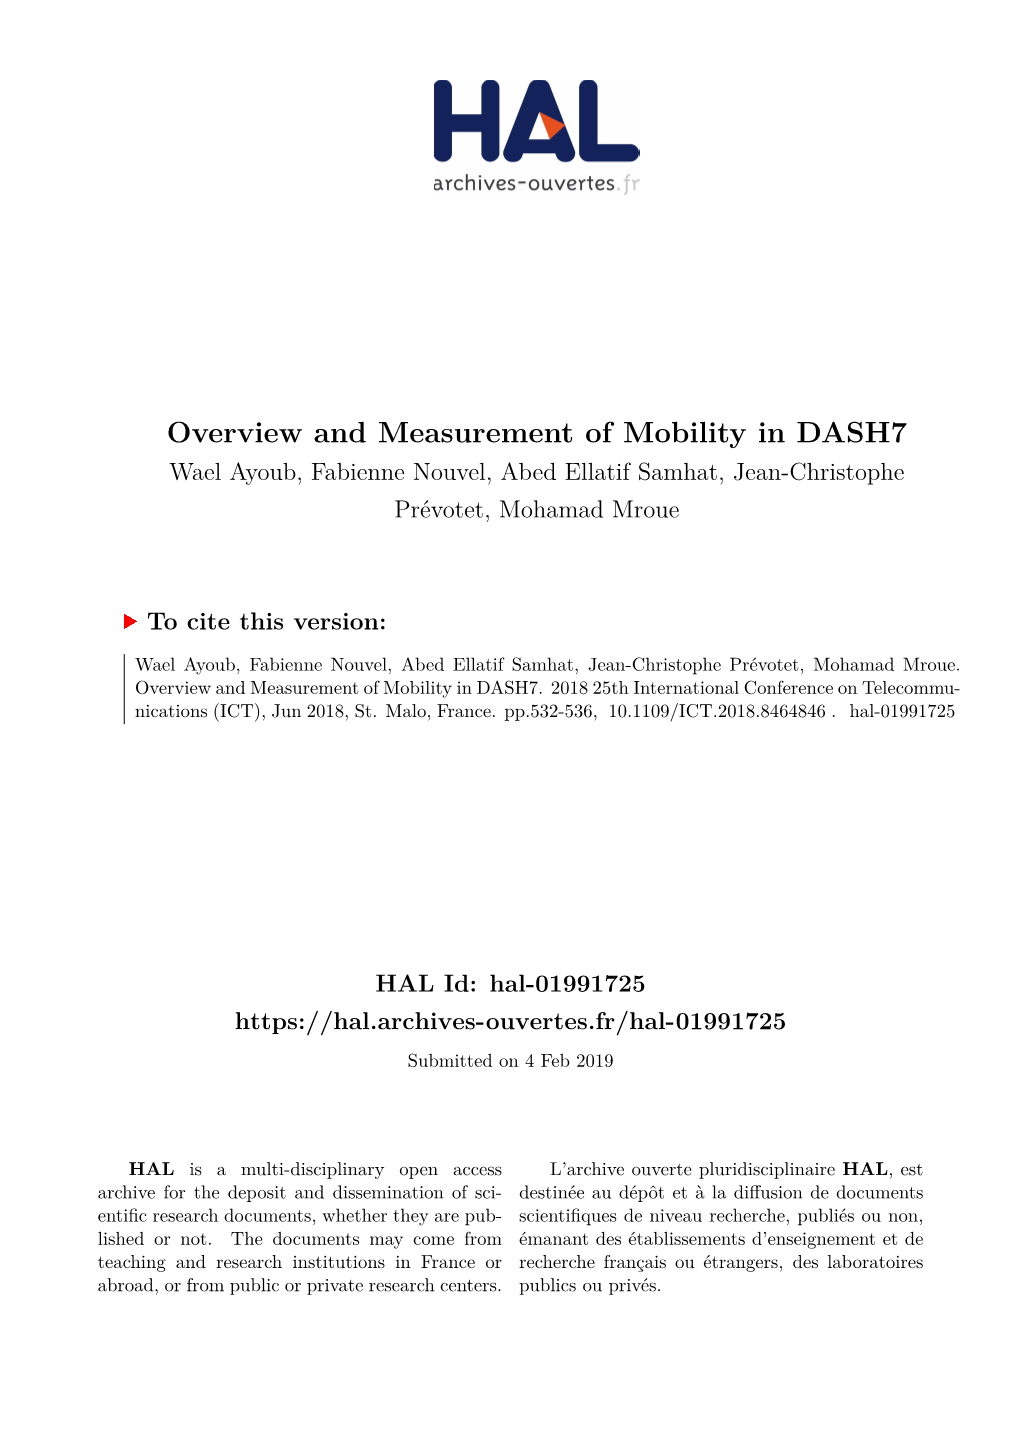 Overview and Measurement of Mobility in DASH7 Wael Ayoub, Fabienne Nouvel, Abed Ellatif Samhat, Jean-Christophe Prévotet, Mohamad Mroue